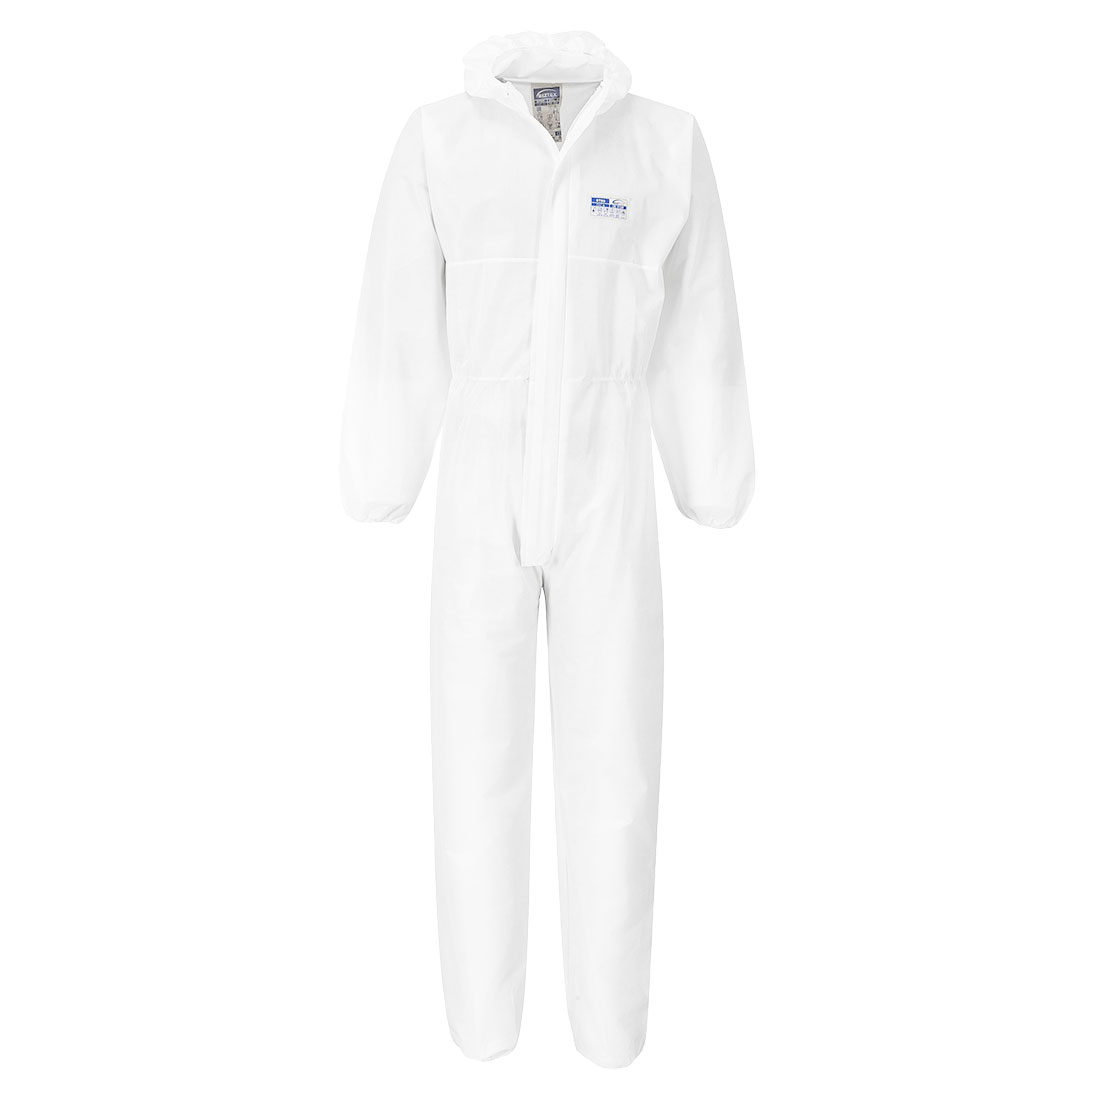 ST80 - BizTex SMS FR Coverall Type 5/6 (Pk50)